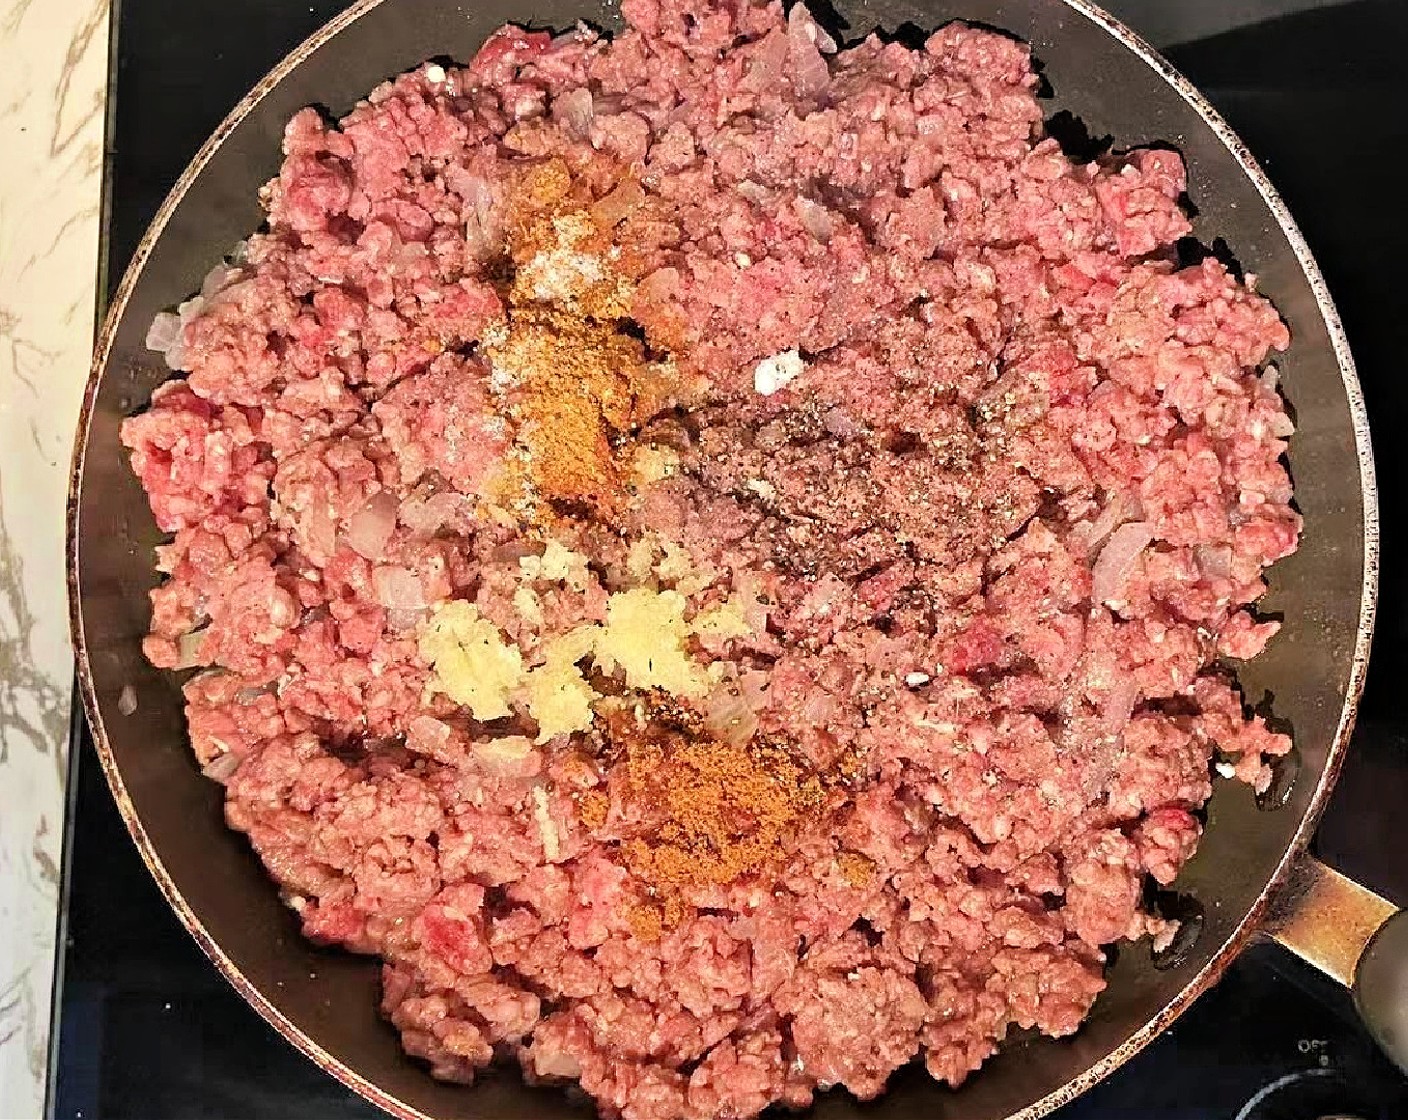 step 3 Add the Ground Beef (1.5 lb), Garlic (2 cloves), Paprika (1 tsp), Brown Sugar (1/2 tsp), Salt (to taste), and Ground Black Pepper (to taste). Stir and continue cooking until the beef is browned; about 15 minutes.